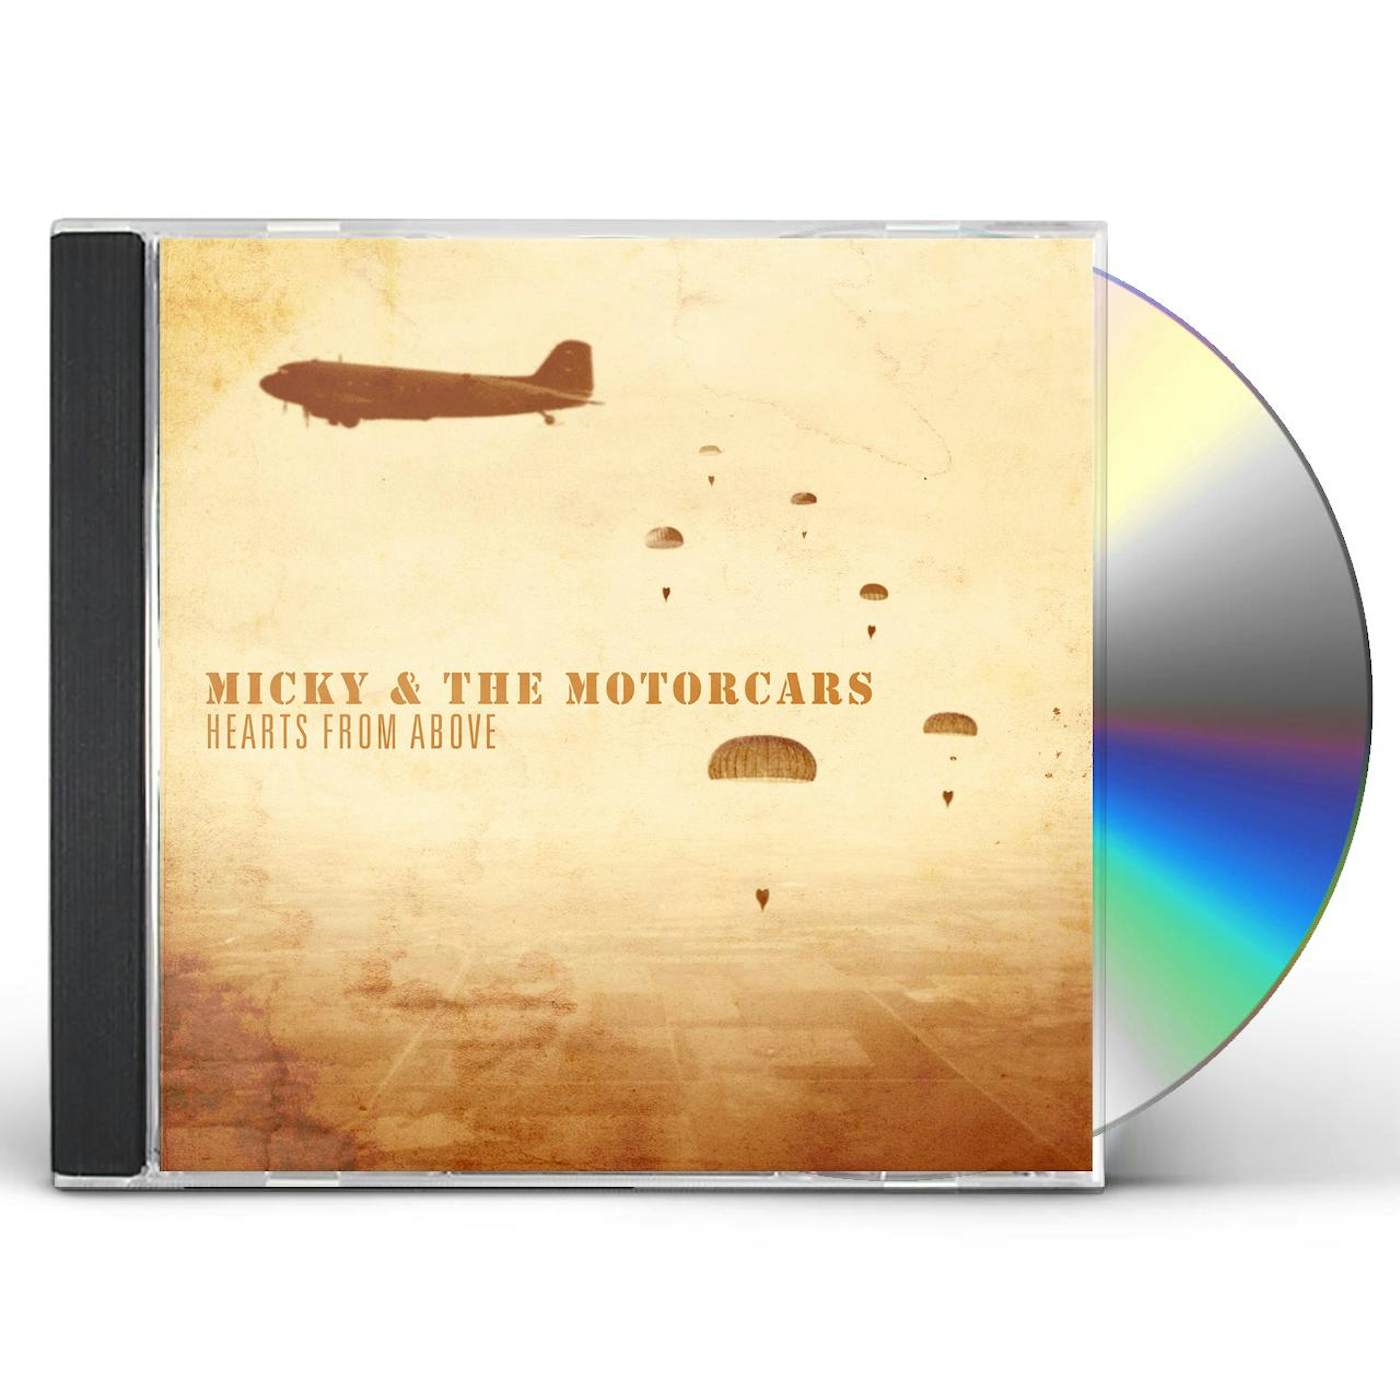 Micky & The Motorcars HEARTS FROM ABOVE CD